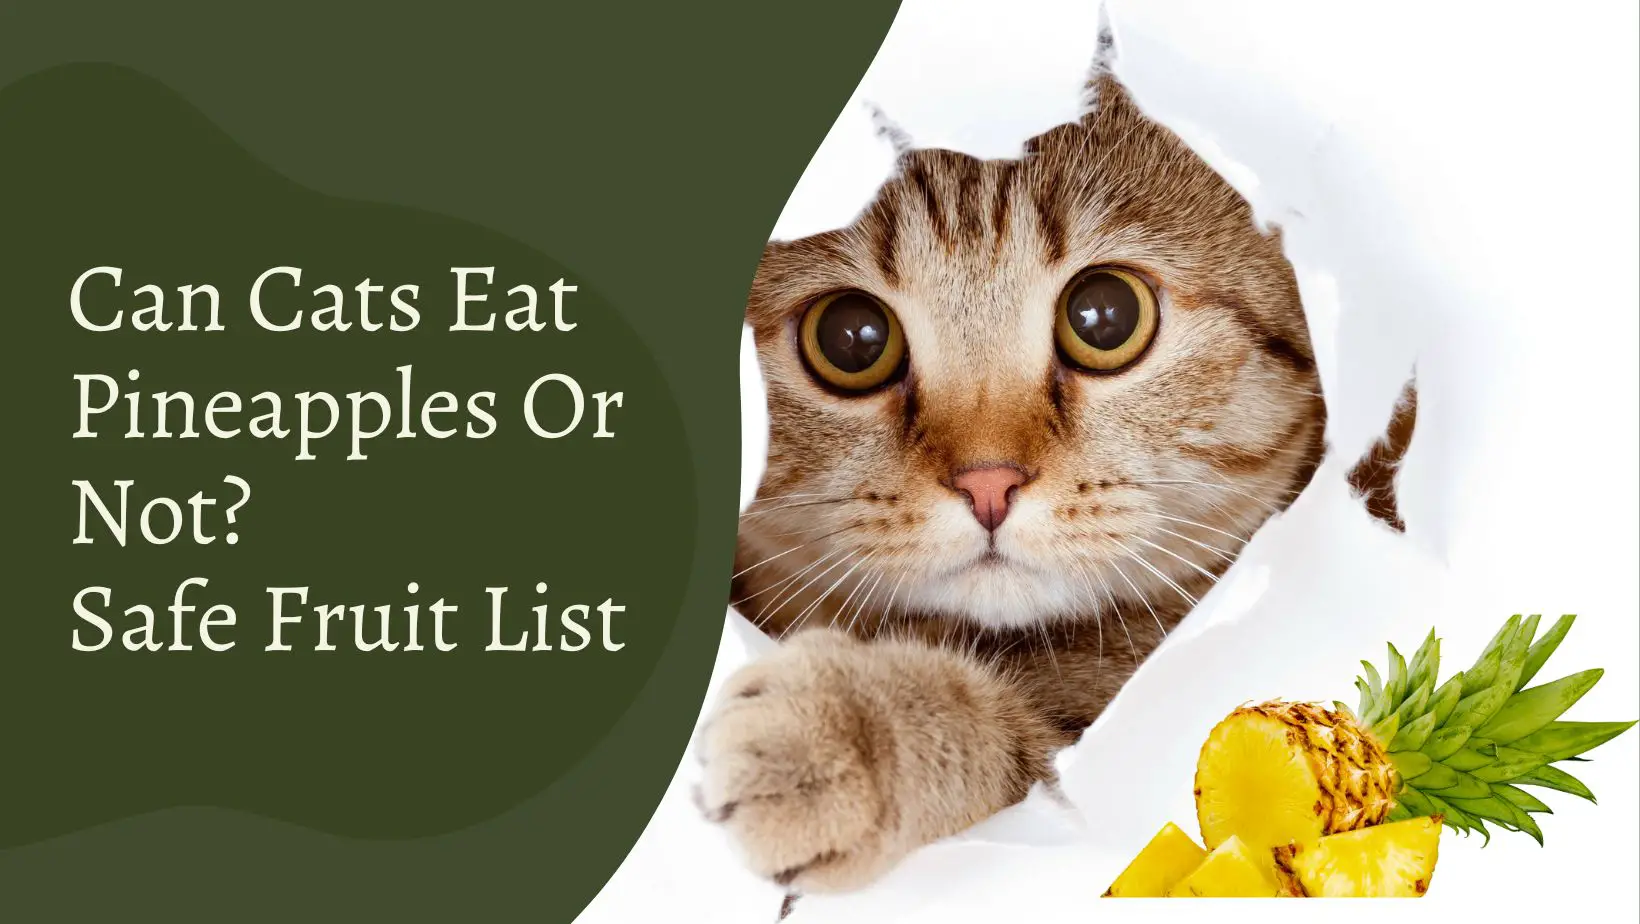 Can Cats Eat Pineapples Or Not